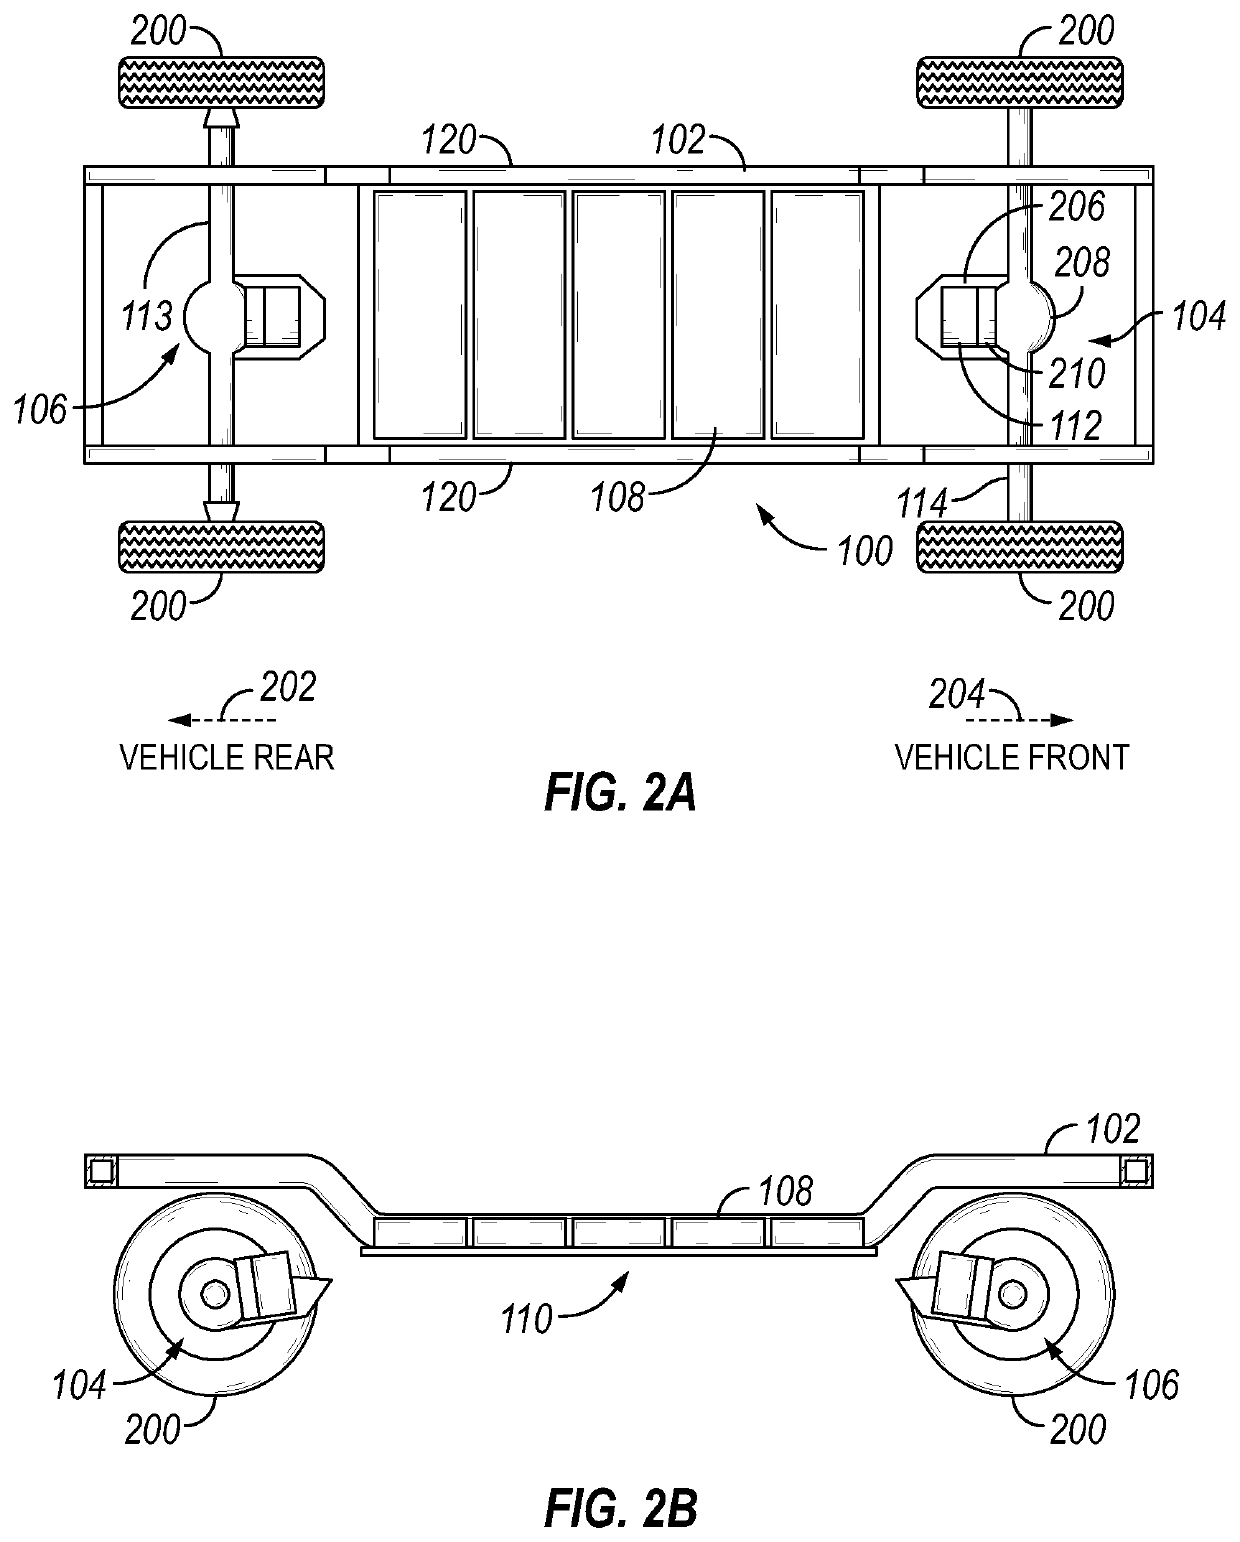 Universal electric conversion kit for internal combustion vehicles